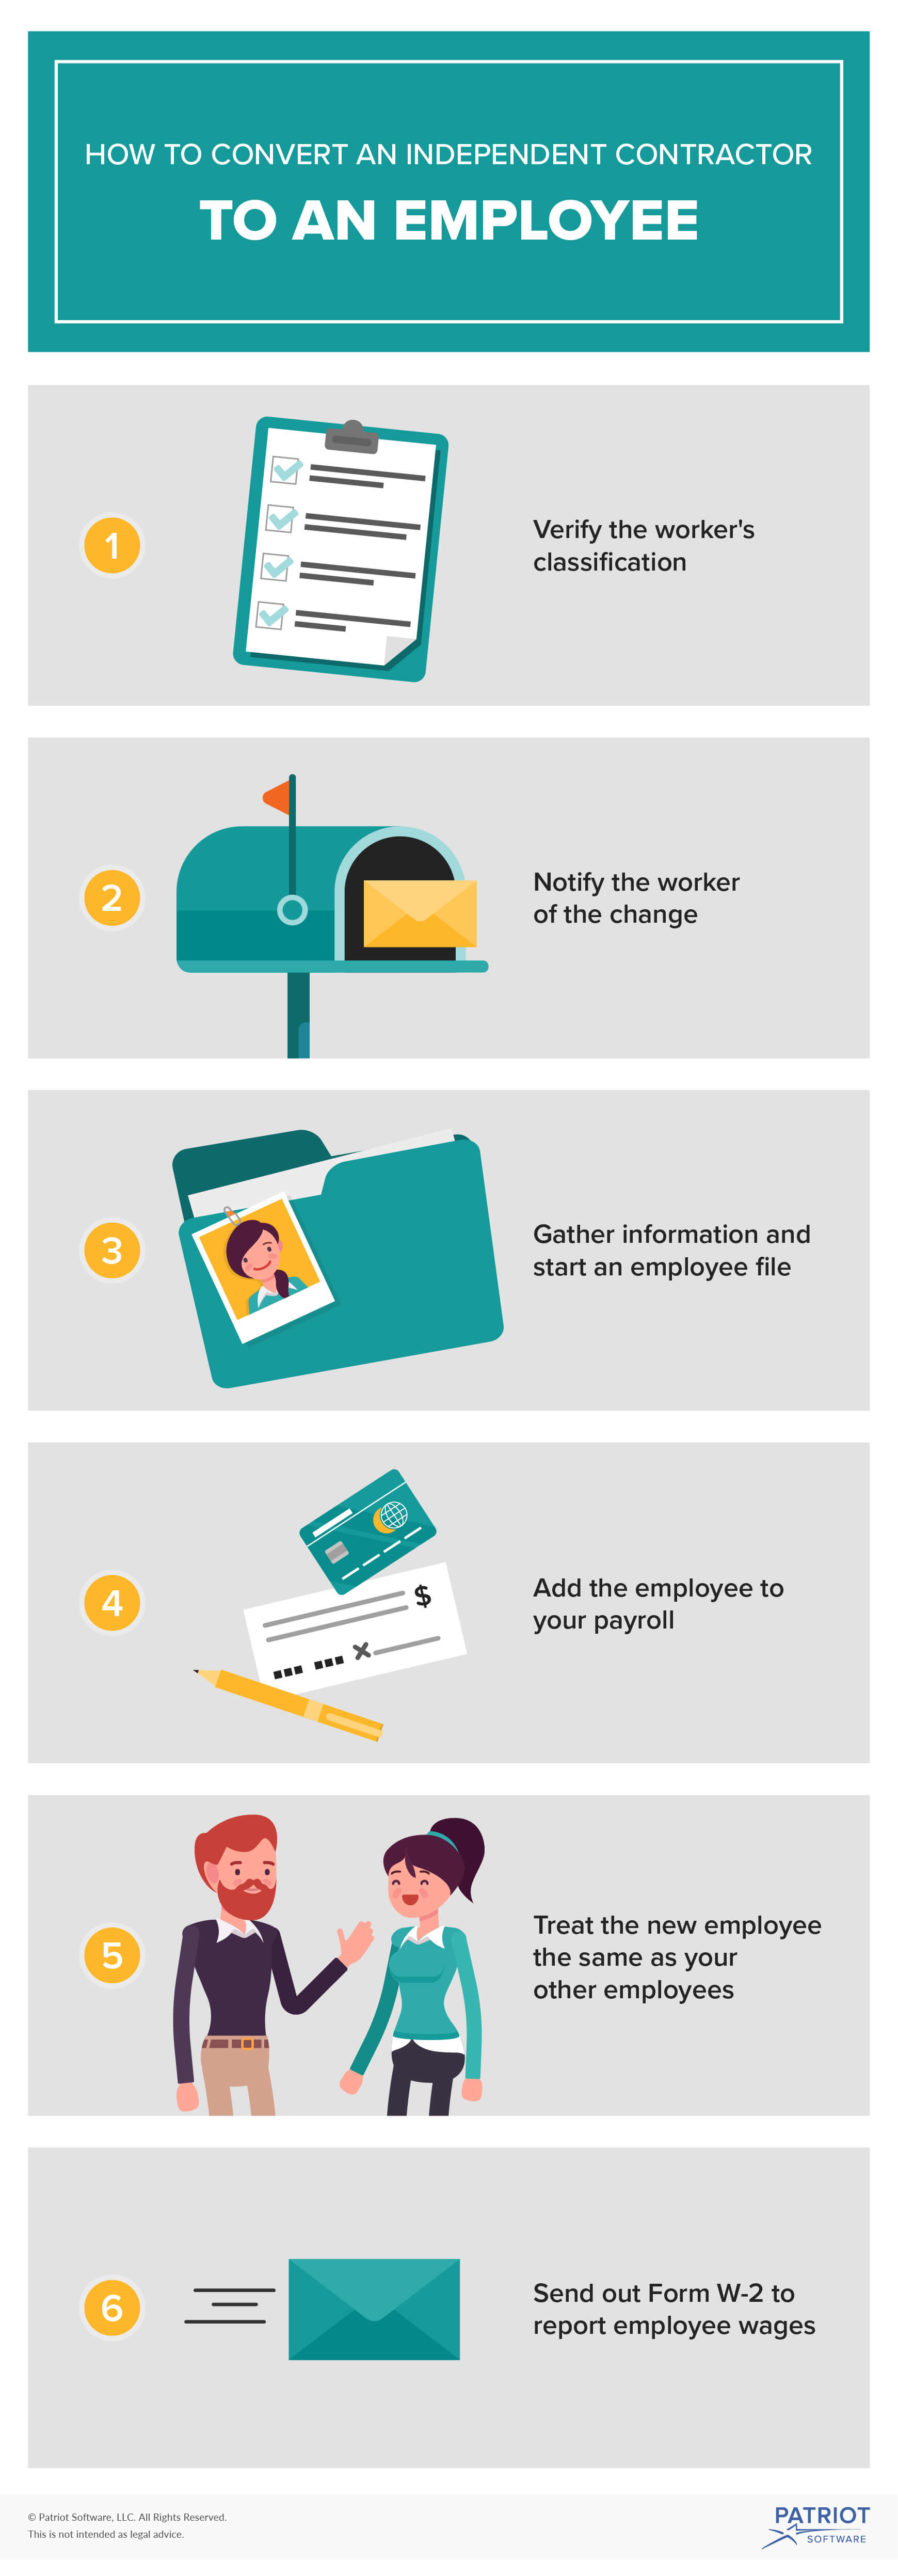 Infographic: How to convert an independent contractor to an employee